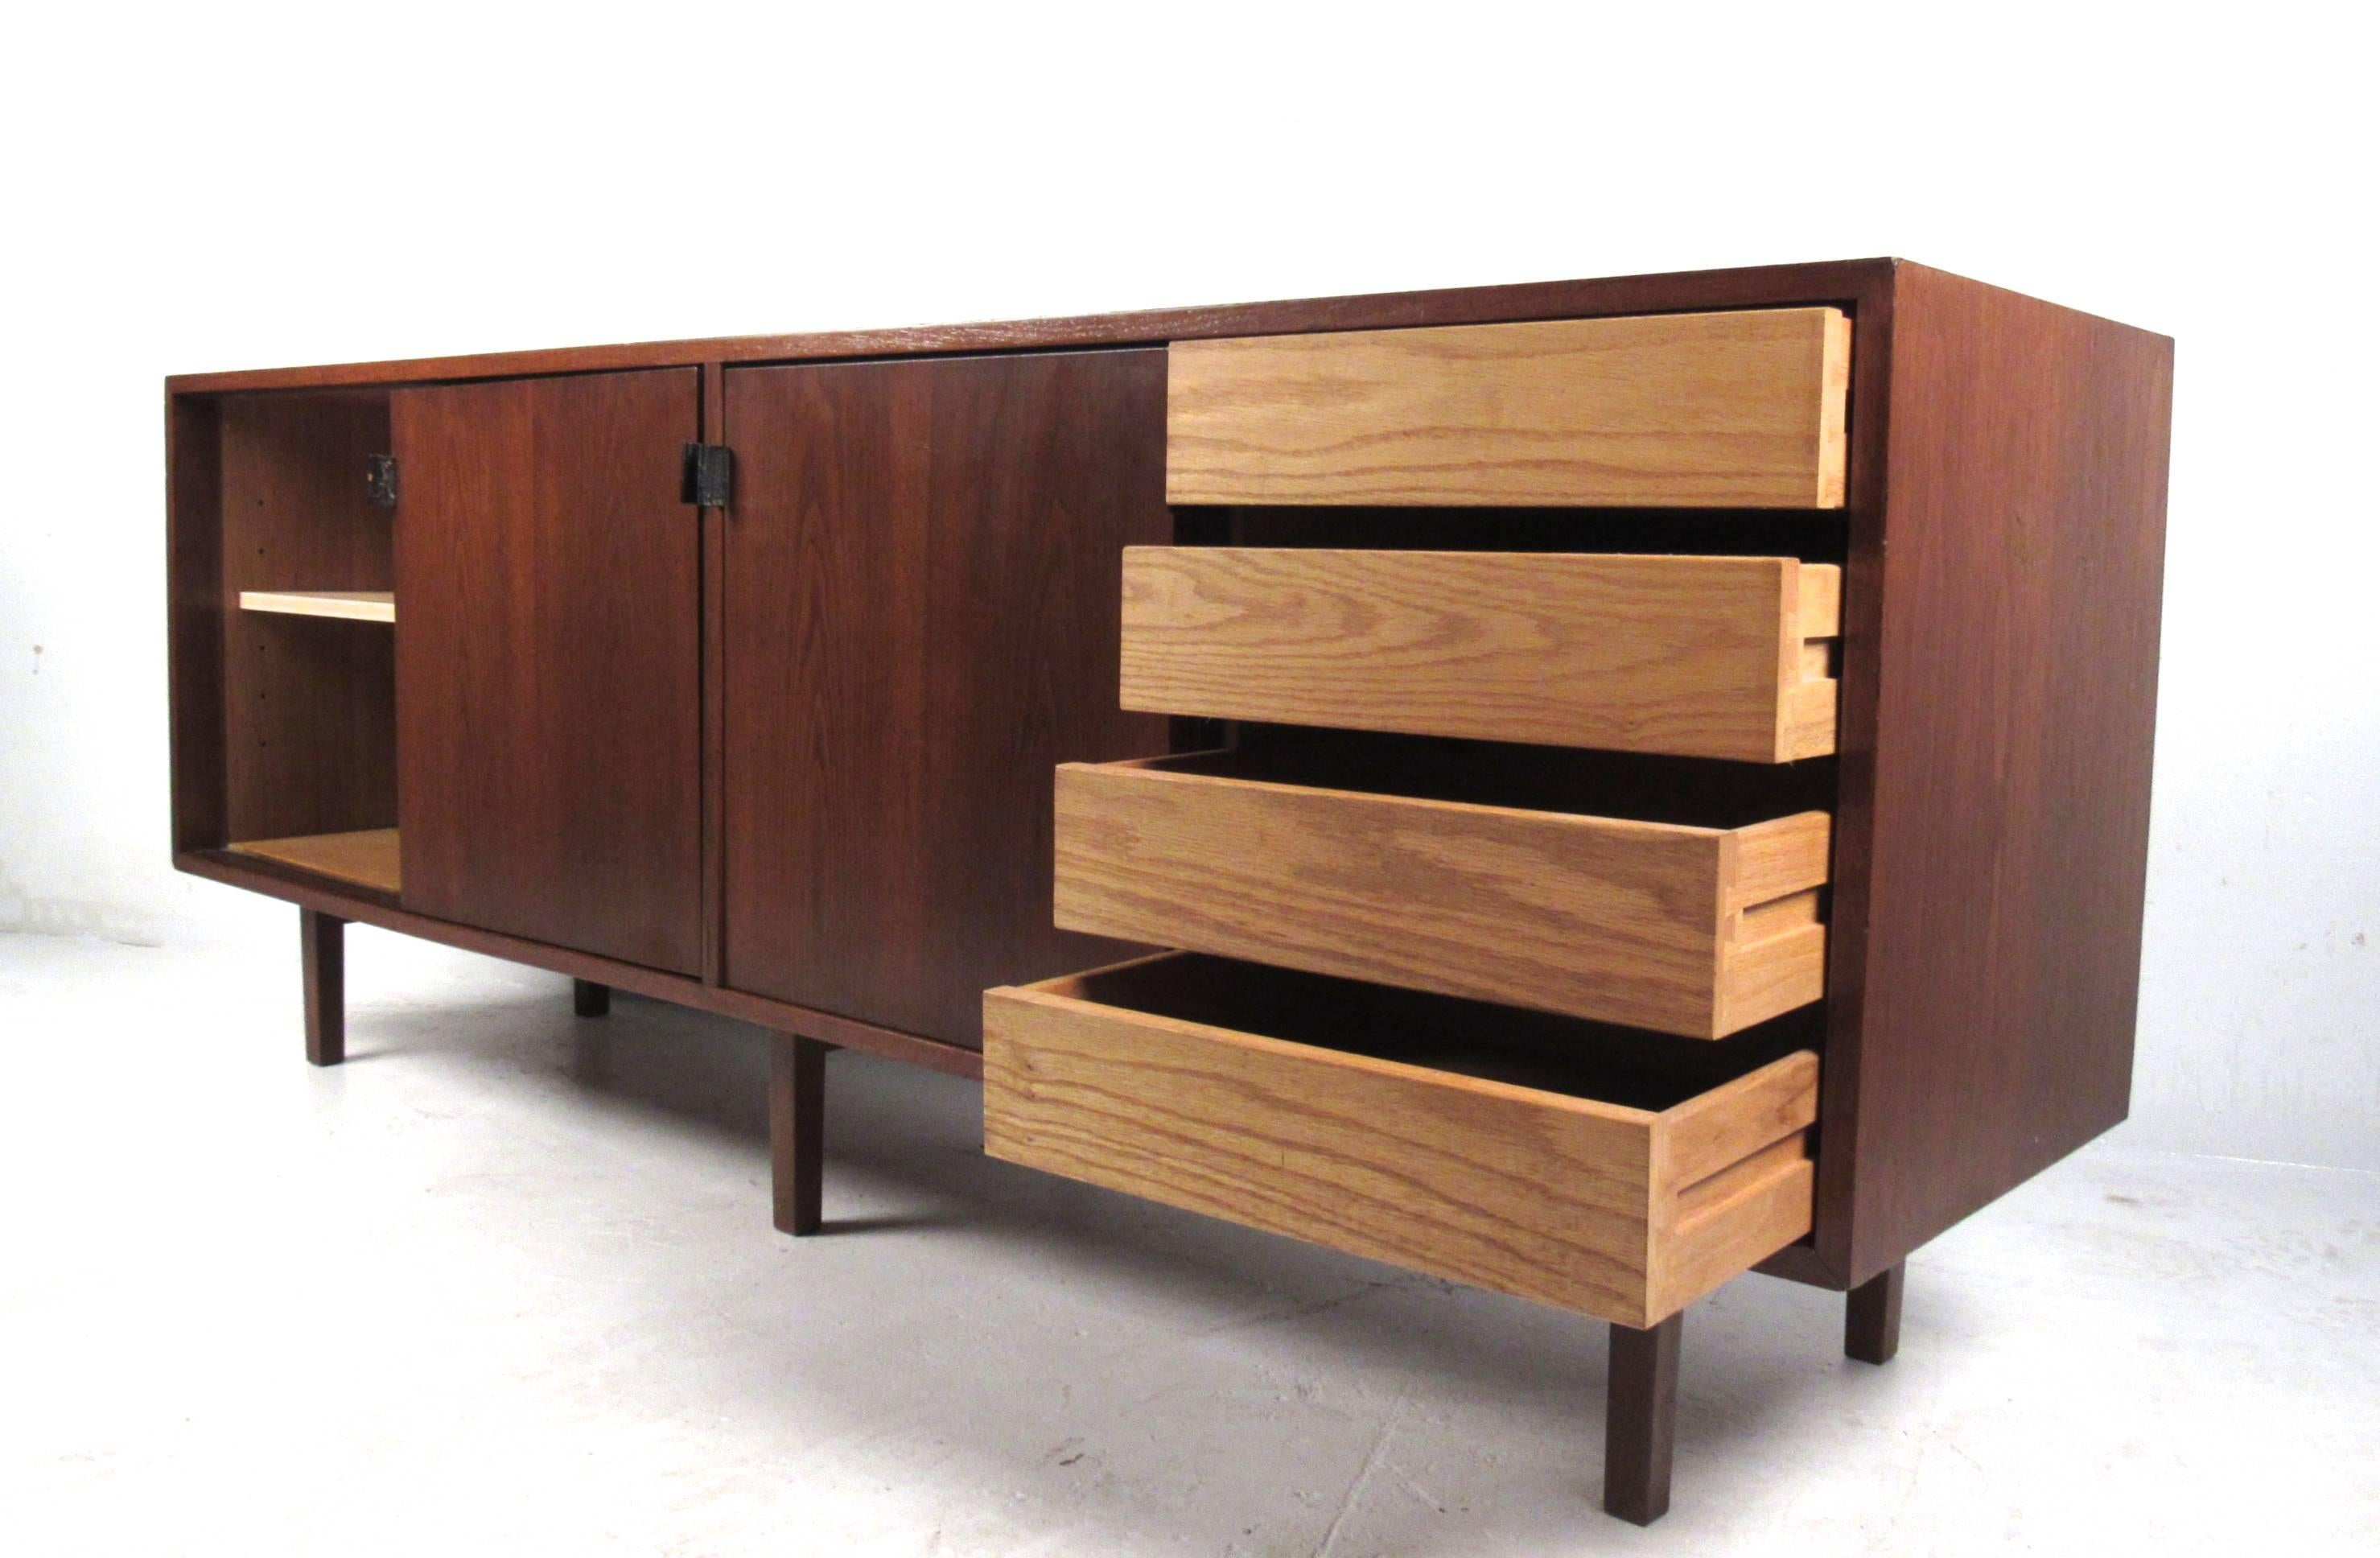 This unique vintage credenza features sliding door cabinets with drawers for added storage. Sturdy six leg construction, leather door pulls and adjustable shelves make this a stylish and versatile piece for any interior. Please confirm item location